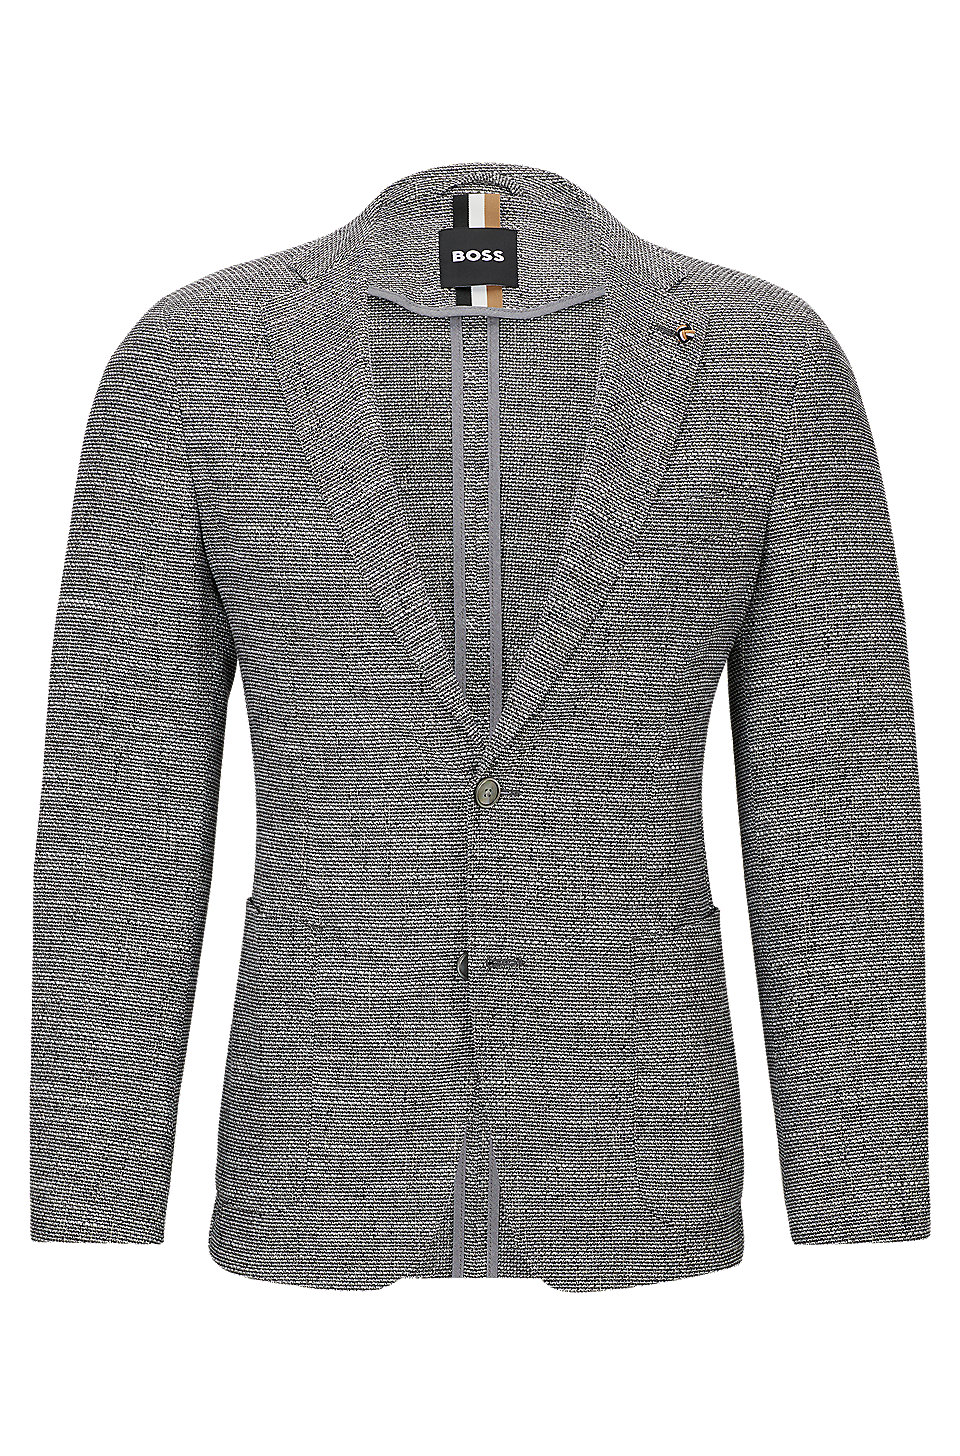 BOSS - Micro-pattern slim-fit jacket in a cotton blend